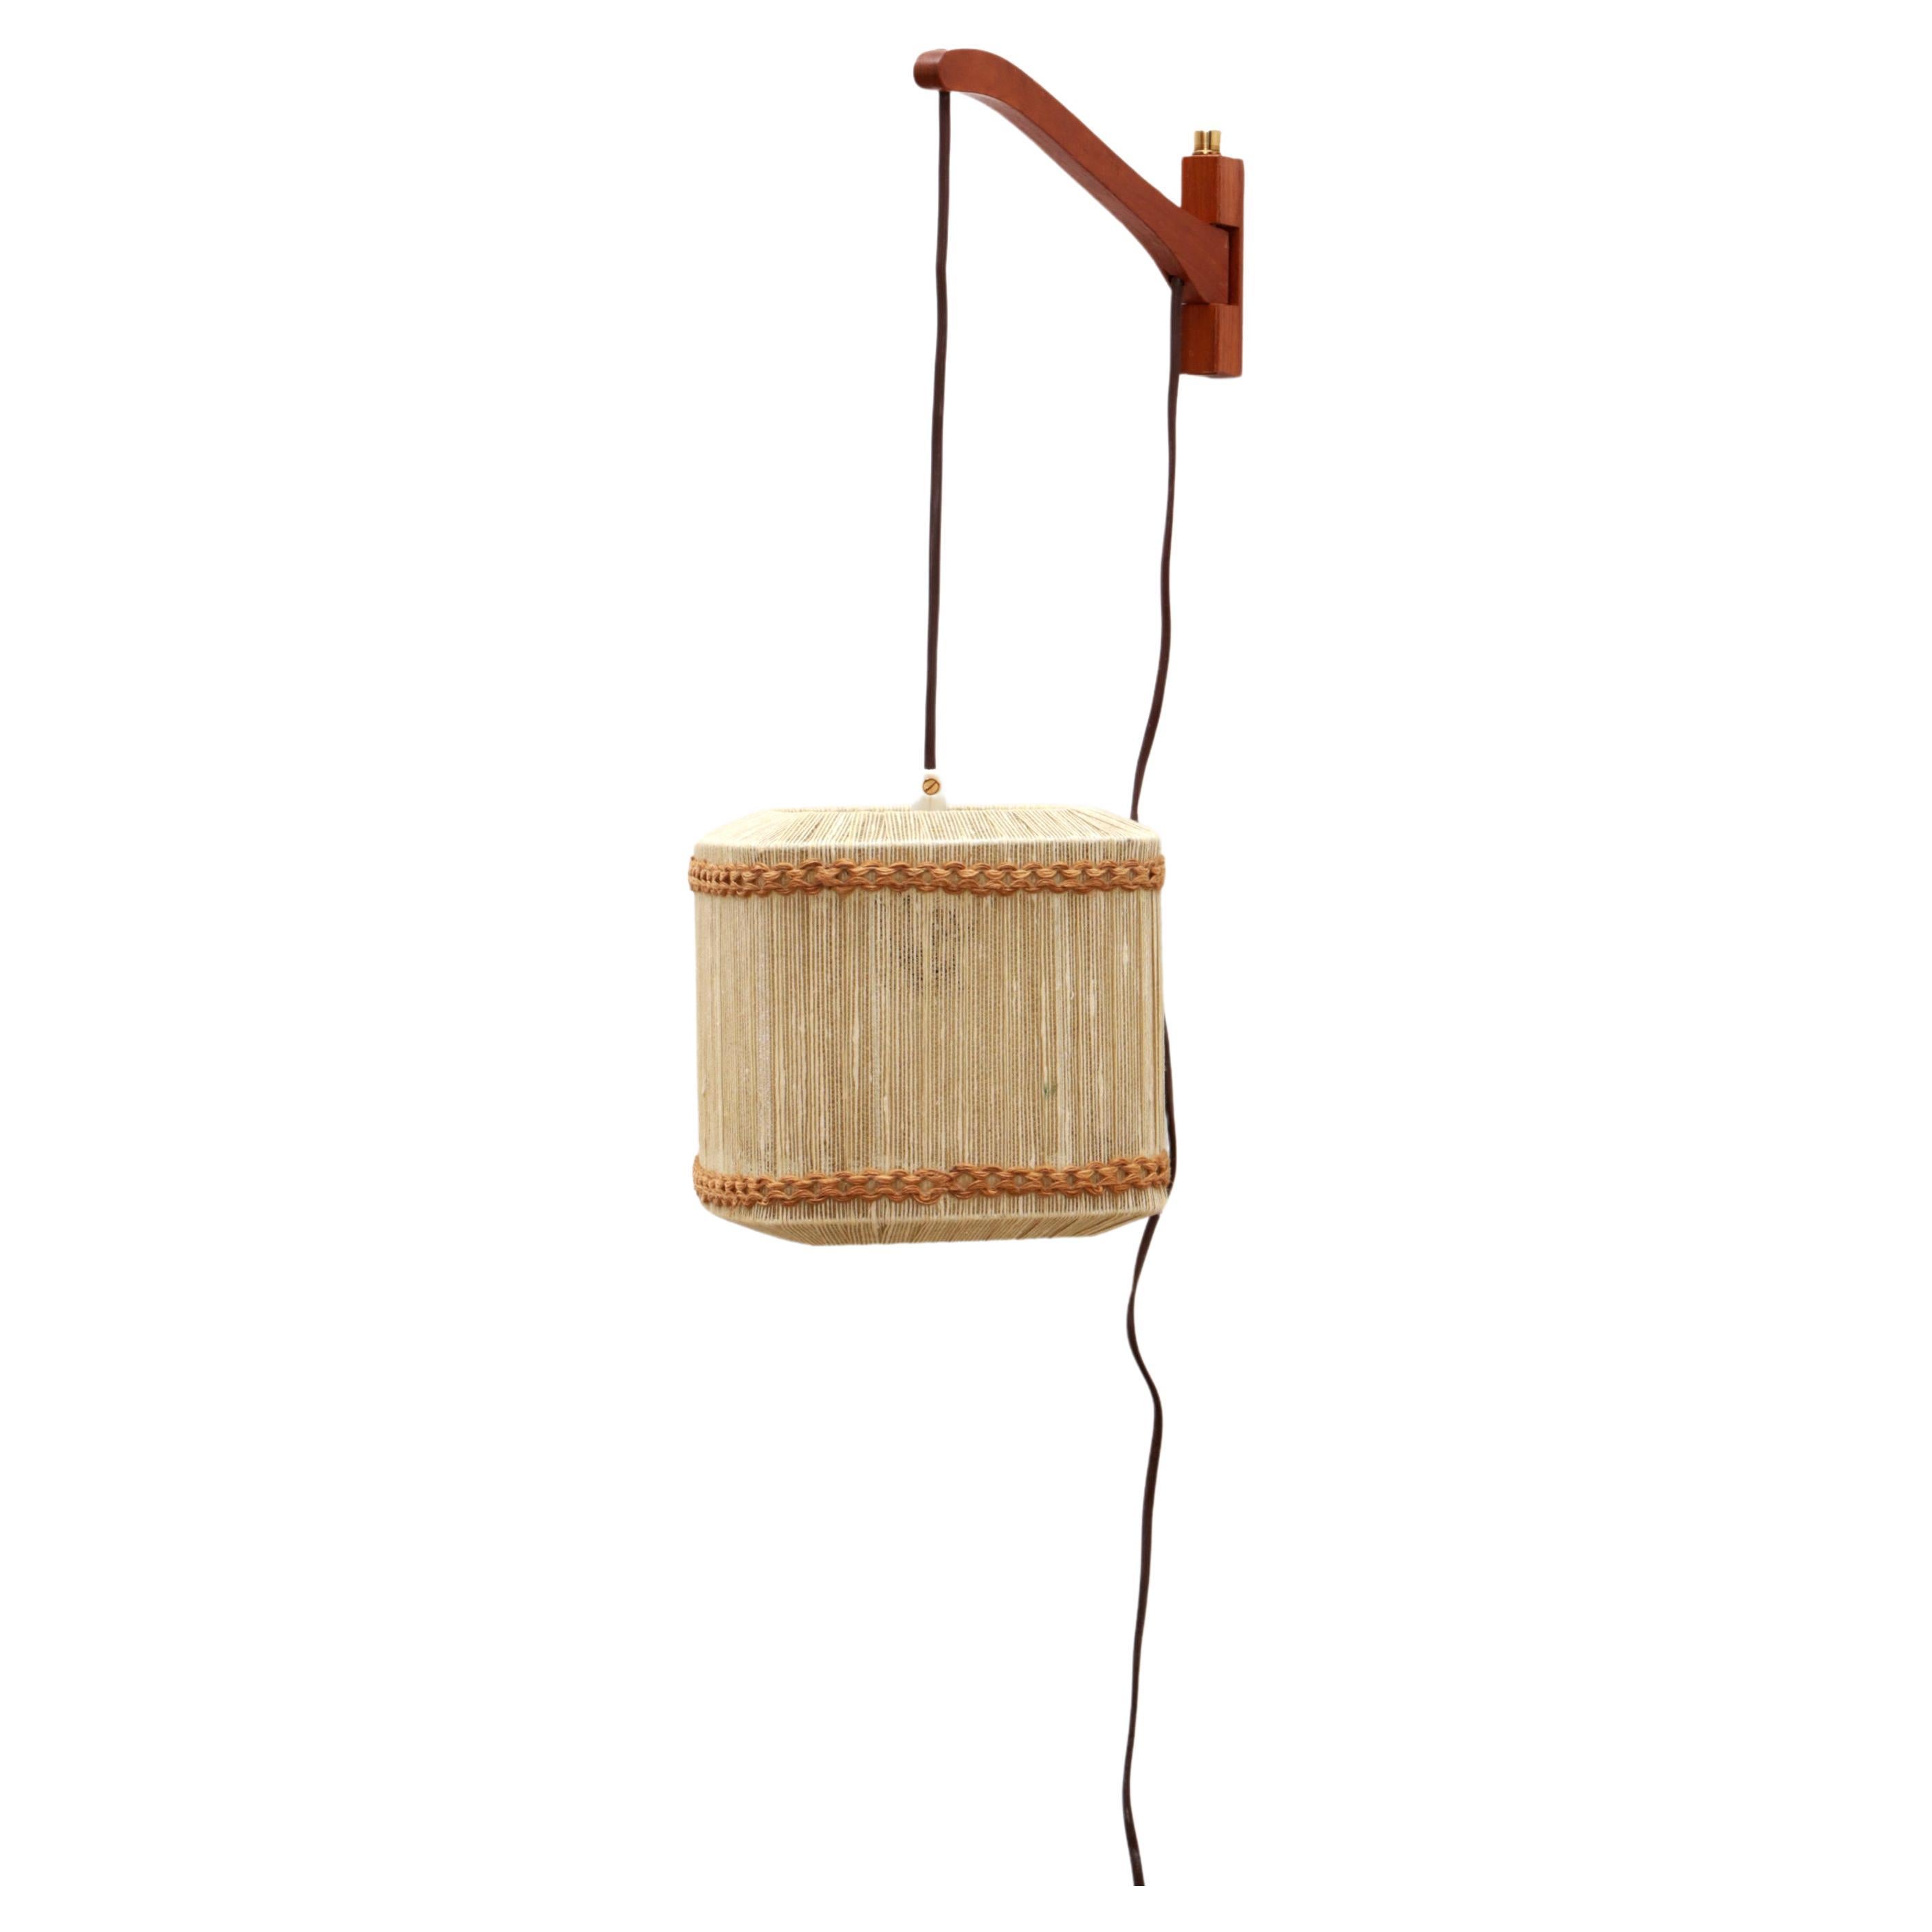 Vintage Wall hanging lamp made of rope and teak, 1960s Sweden.